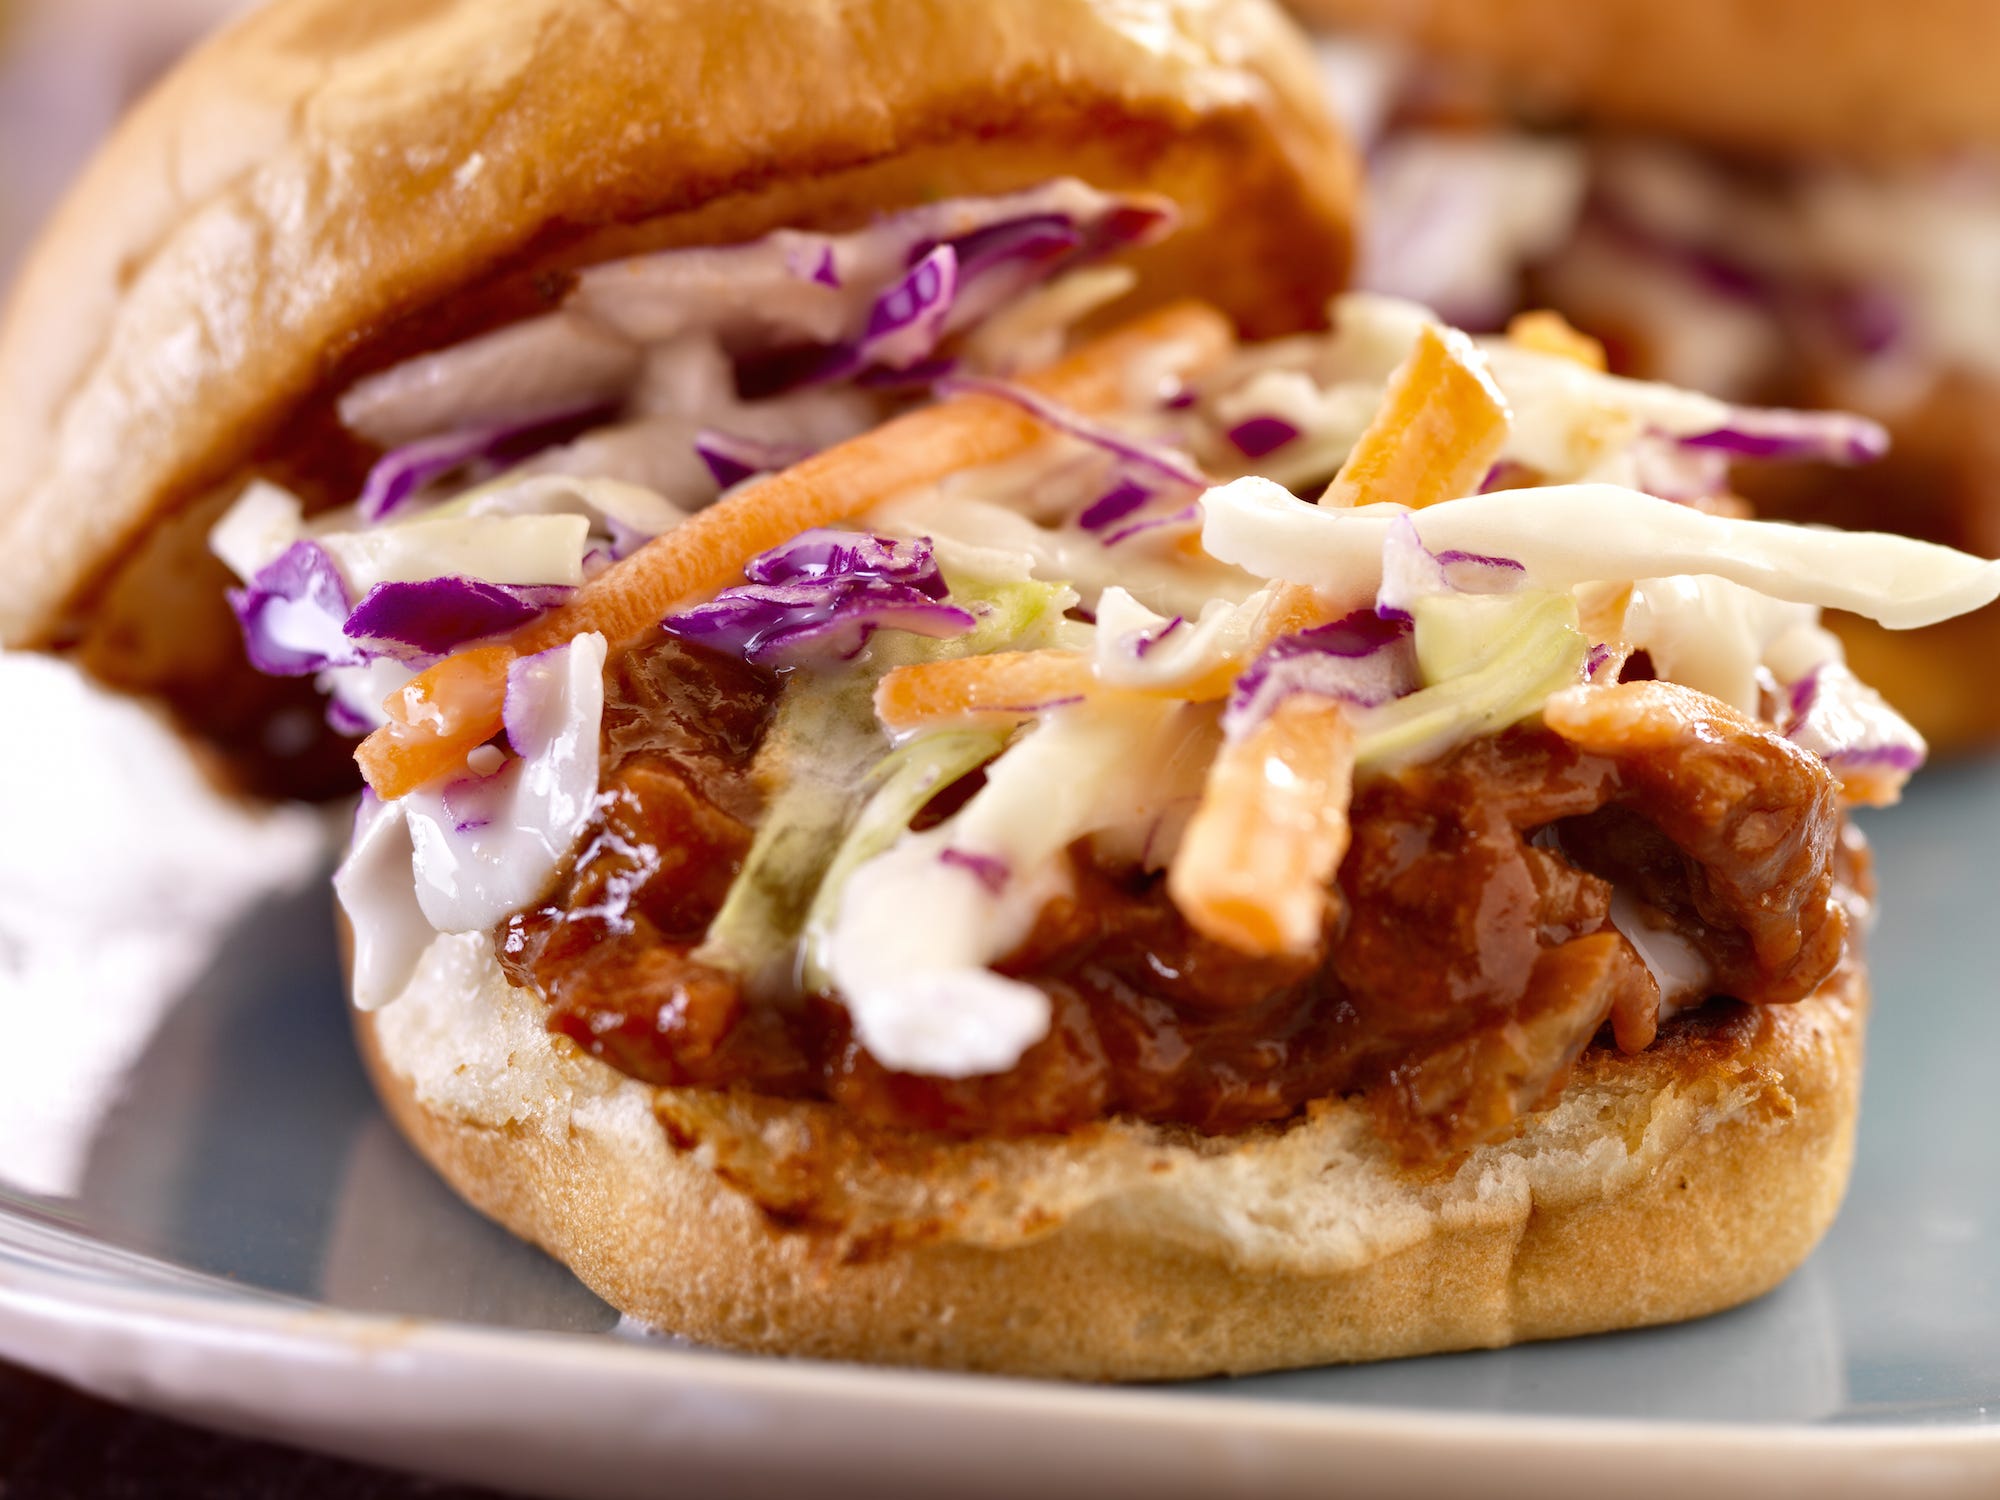 <p>Kālua-style pork is common fare at most luaus, but the slow-roasted and shredded meat is also amazing on sandwiches. Try yours with pineapple coleslaw for an extra Hawaiian punch.</p>